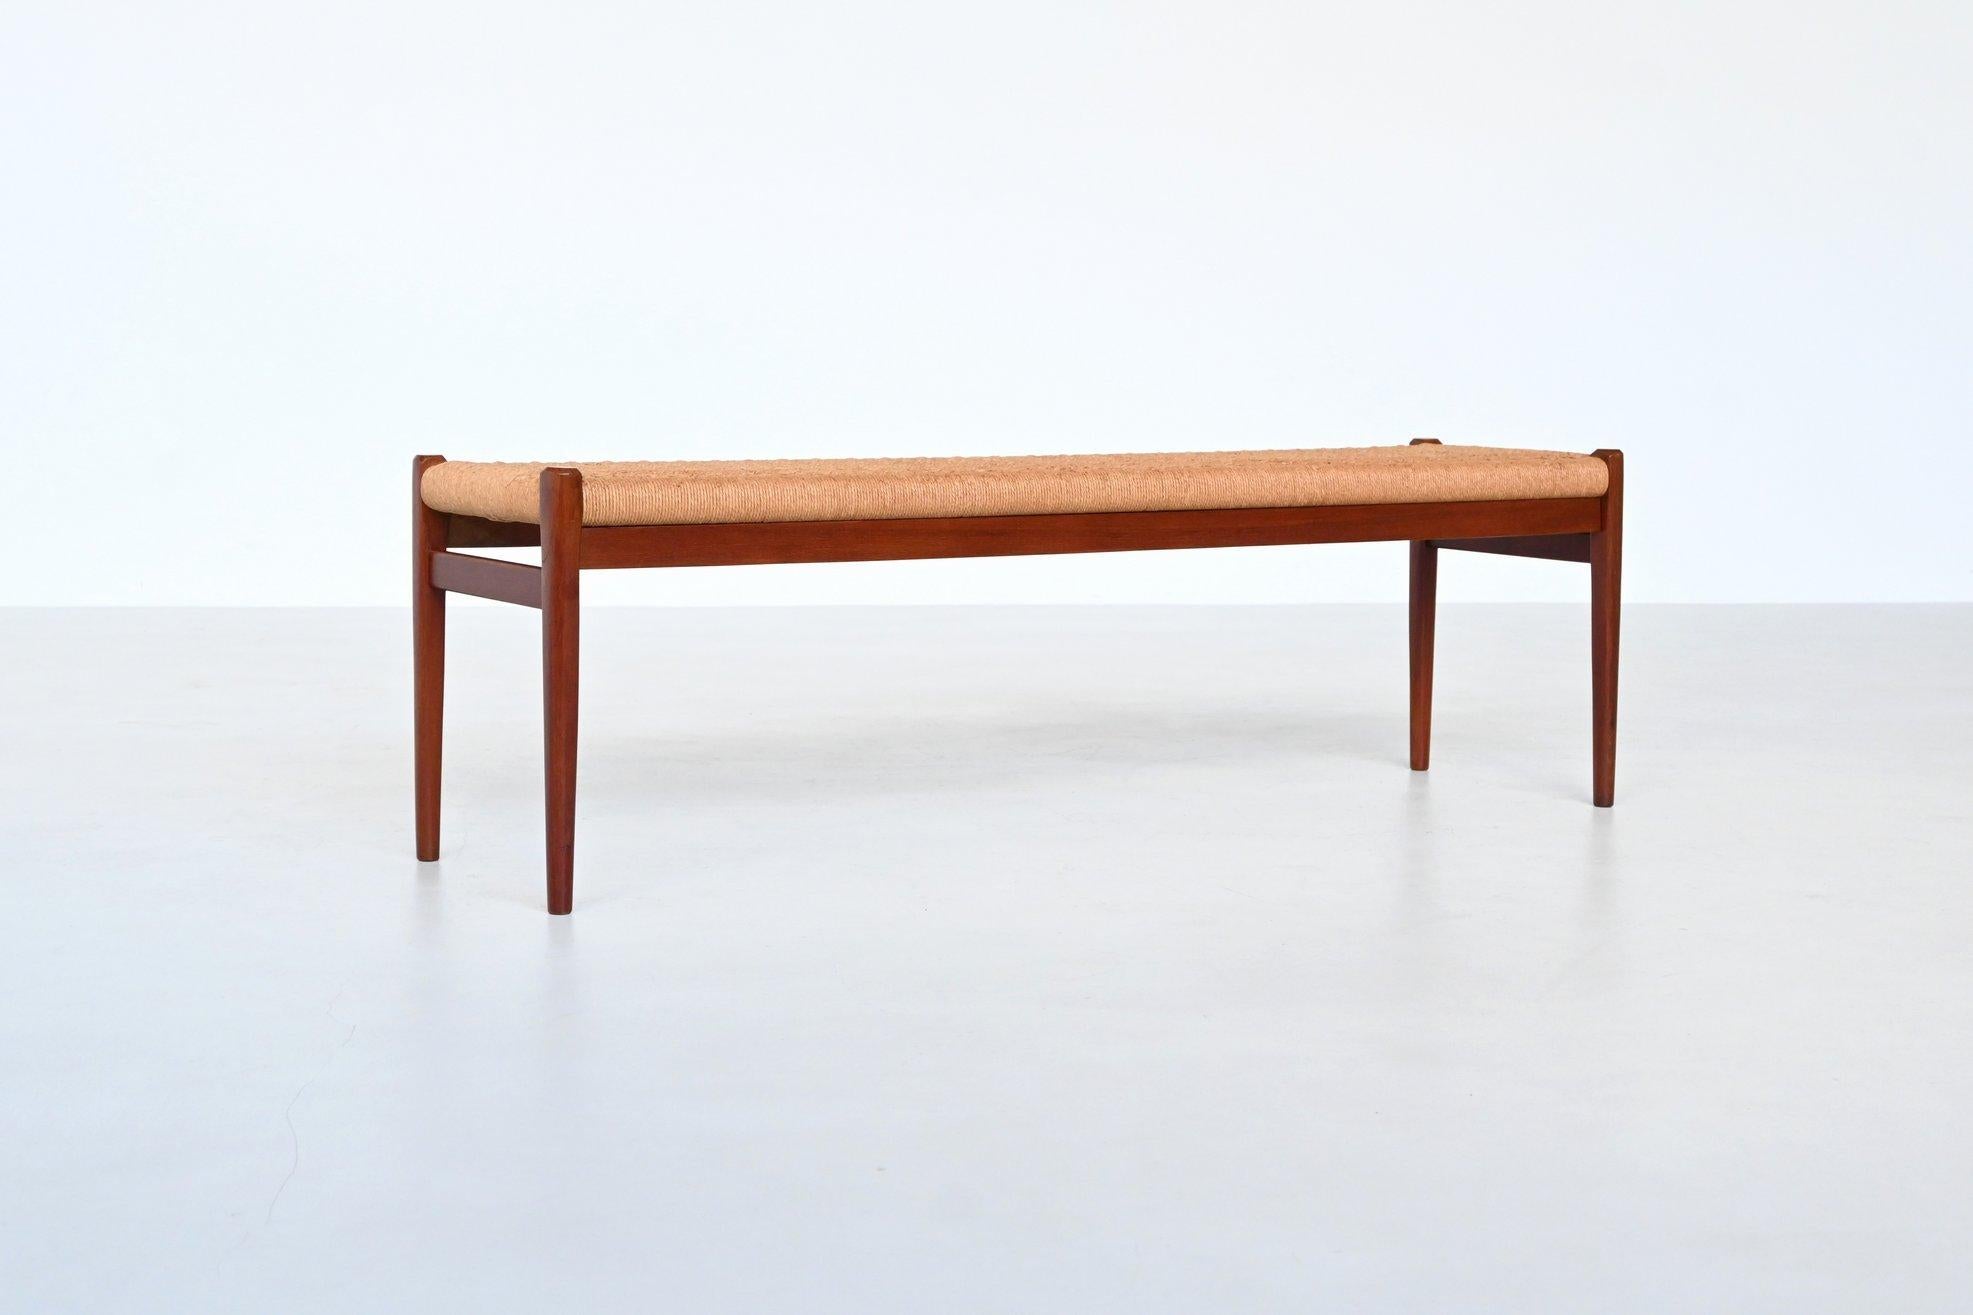 Iconic bench model 63 designed by Niels Otto Møller and manufactured by J.L. Møller Mobelfabrik, Denmark 1960. This beautiful shaped bench is made of solid teak tapered wood and the seat is upholstered with original woven paper cord. The wood has a